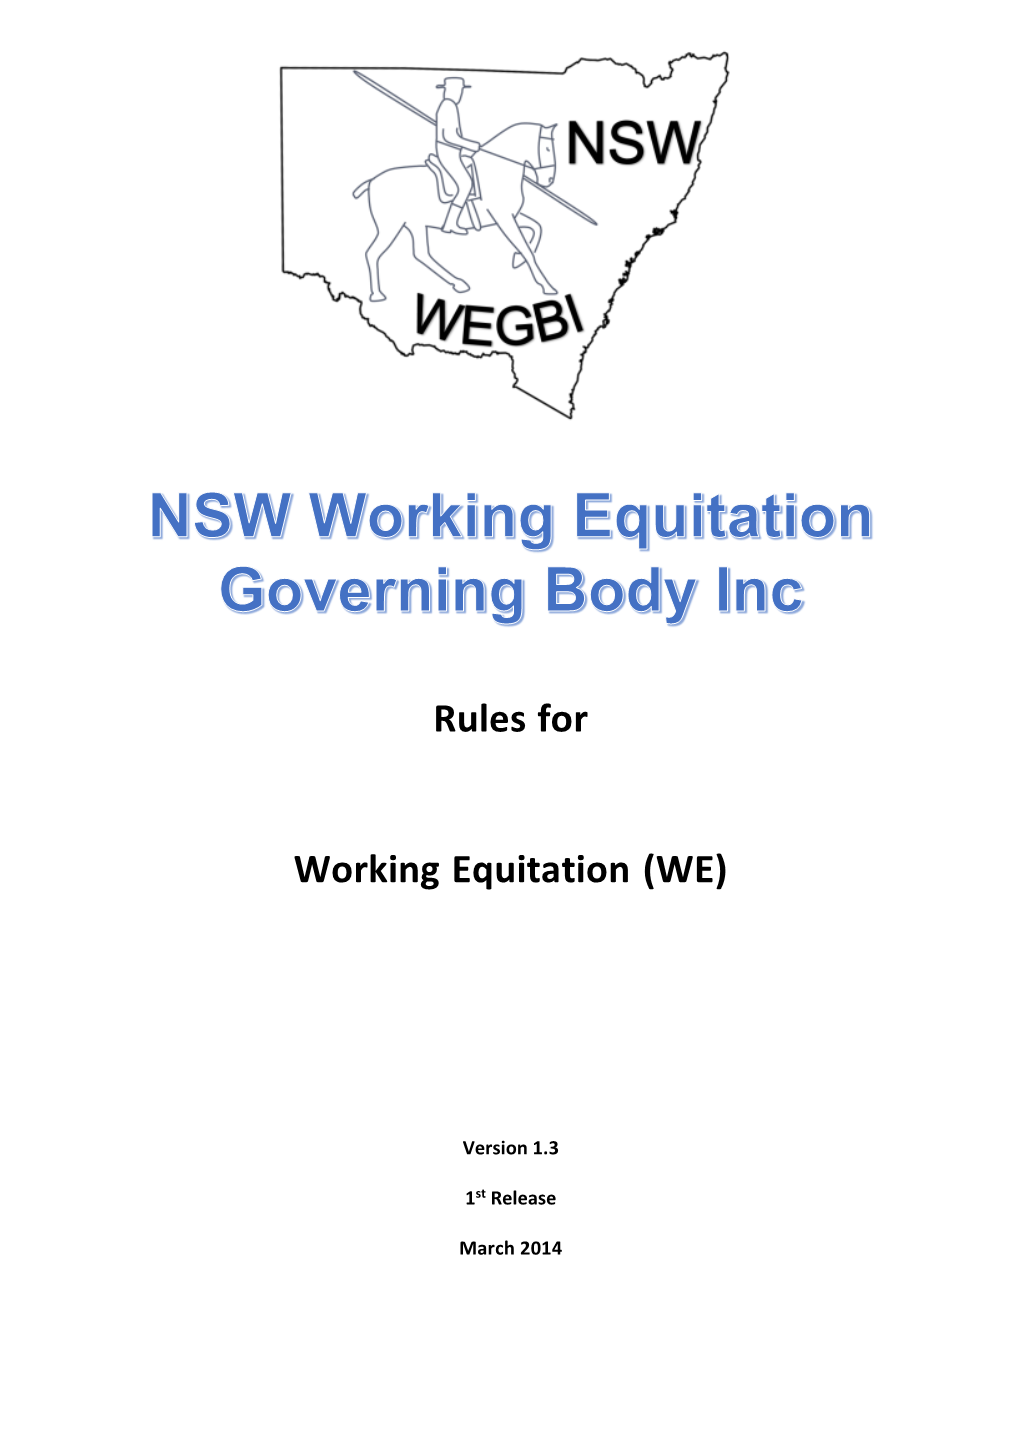 Rules for Working Equitation Are Maintained by NSW Working Equitation Governing Body Inc